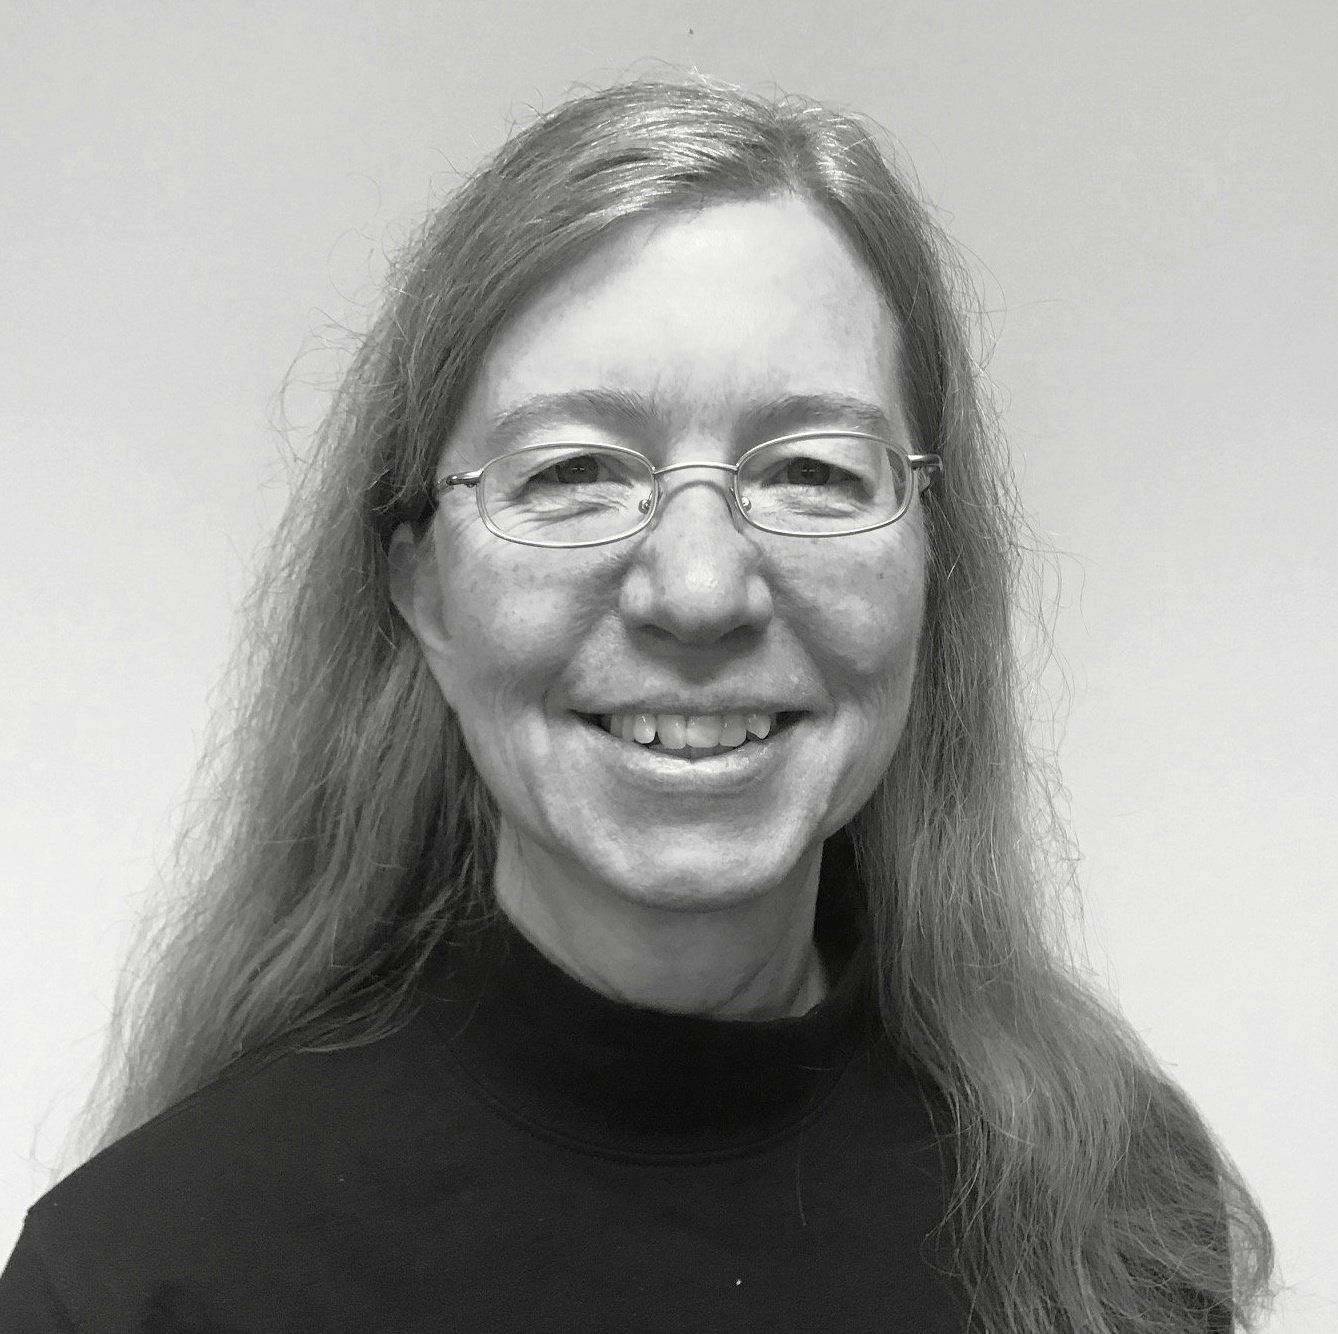 A woman wearing glasses and a black shirt is smiling in a black and white photo.